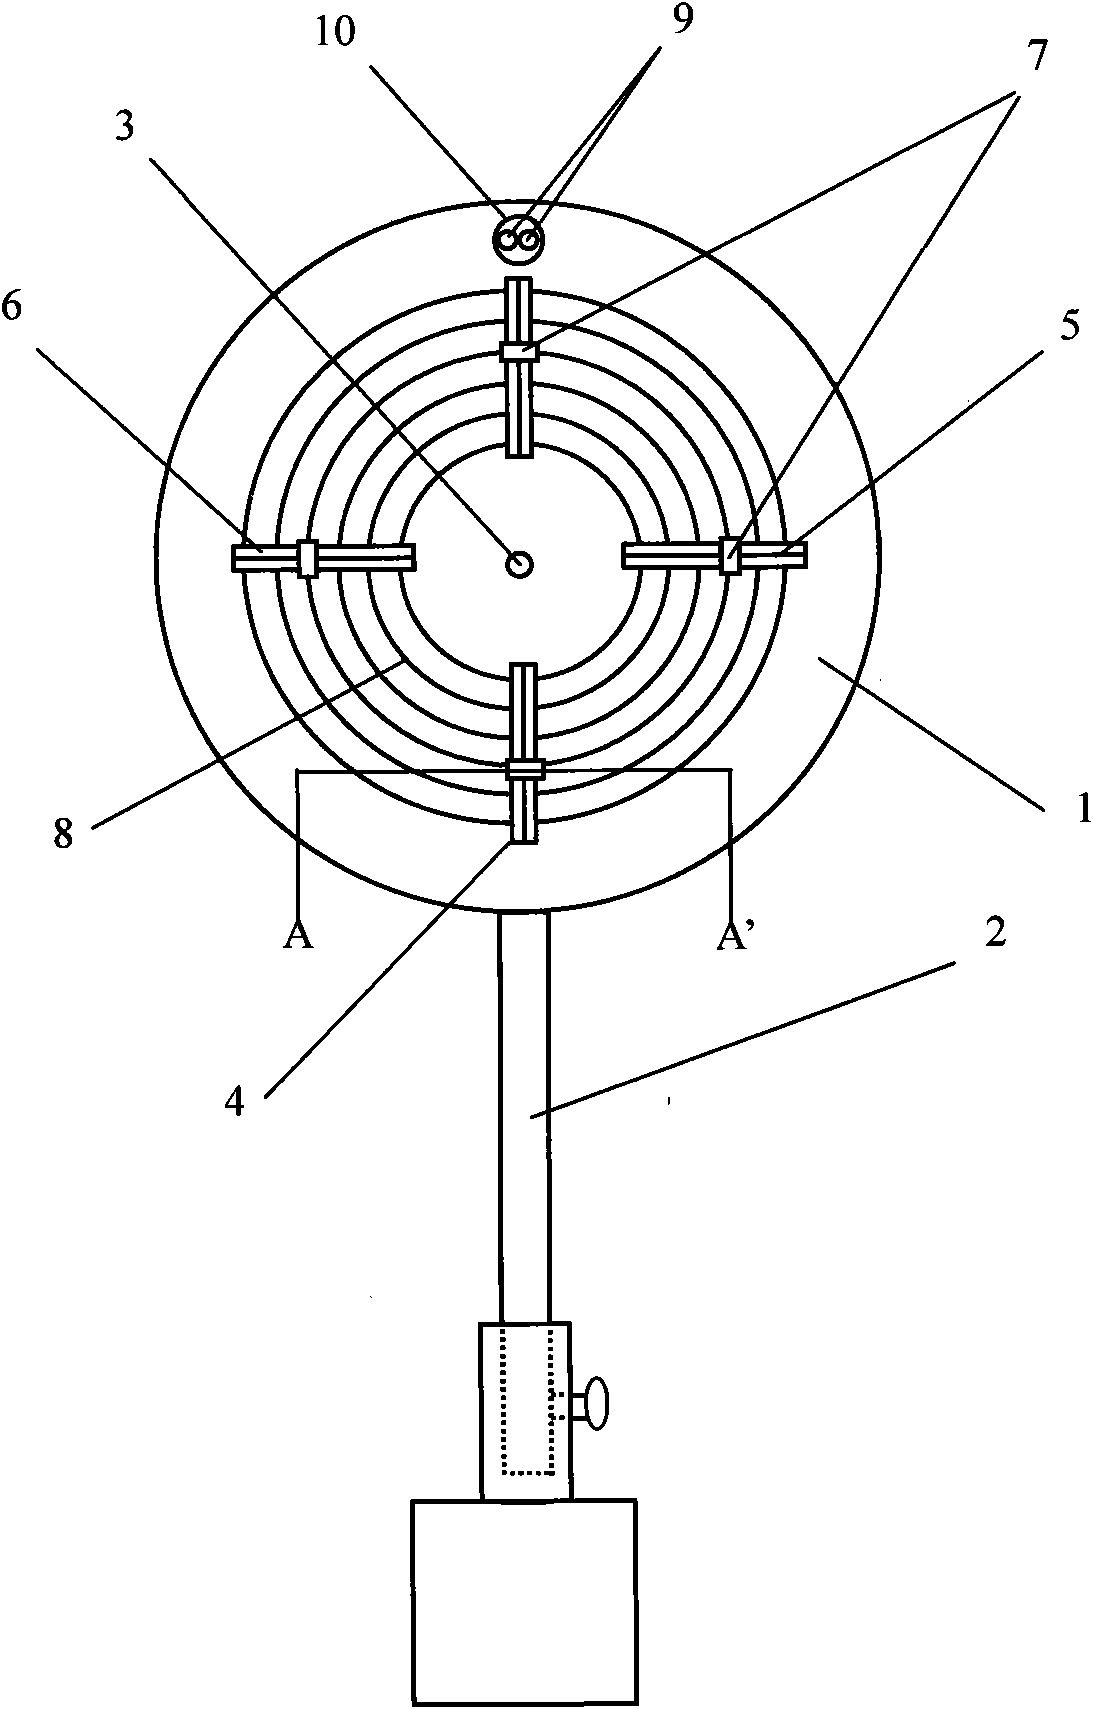 Auxiliary adjusting instrument of light spot center of expanded narrow laser beam